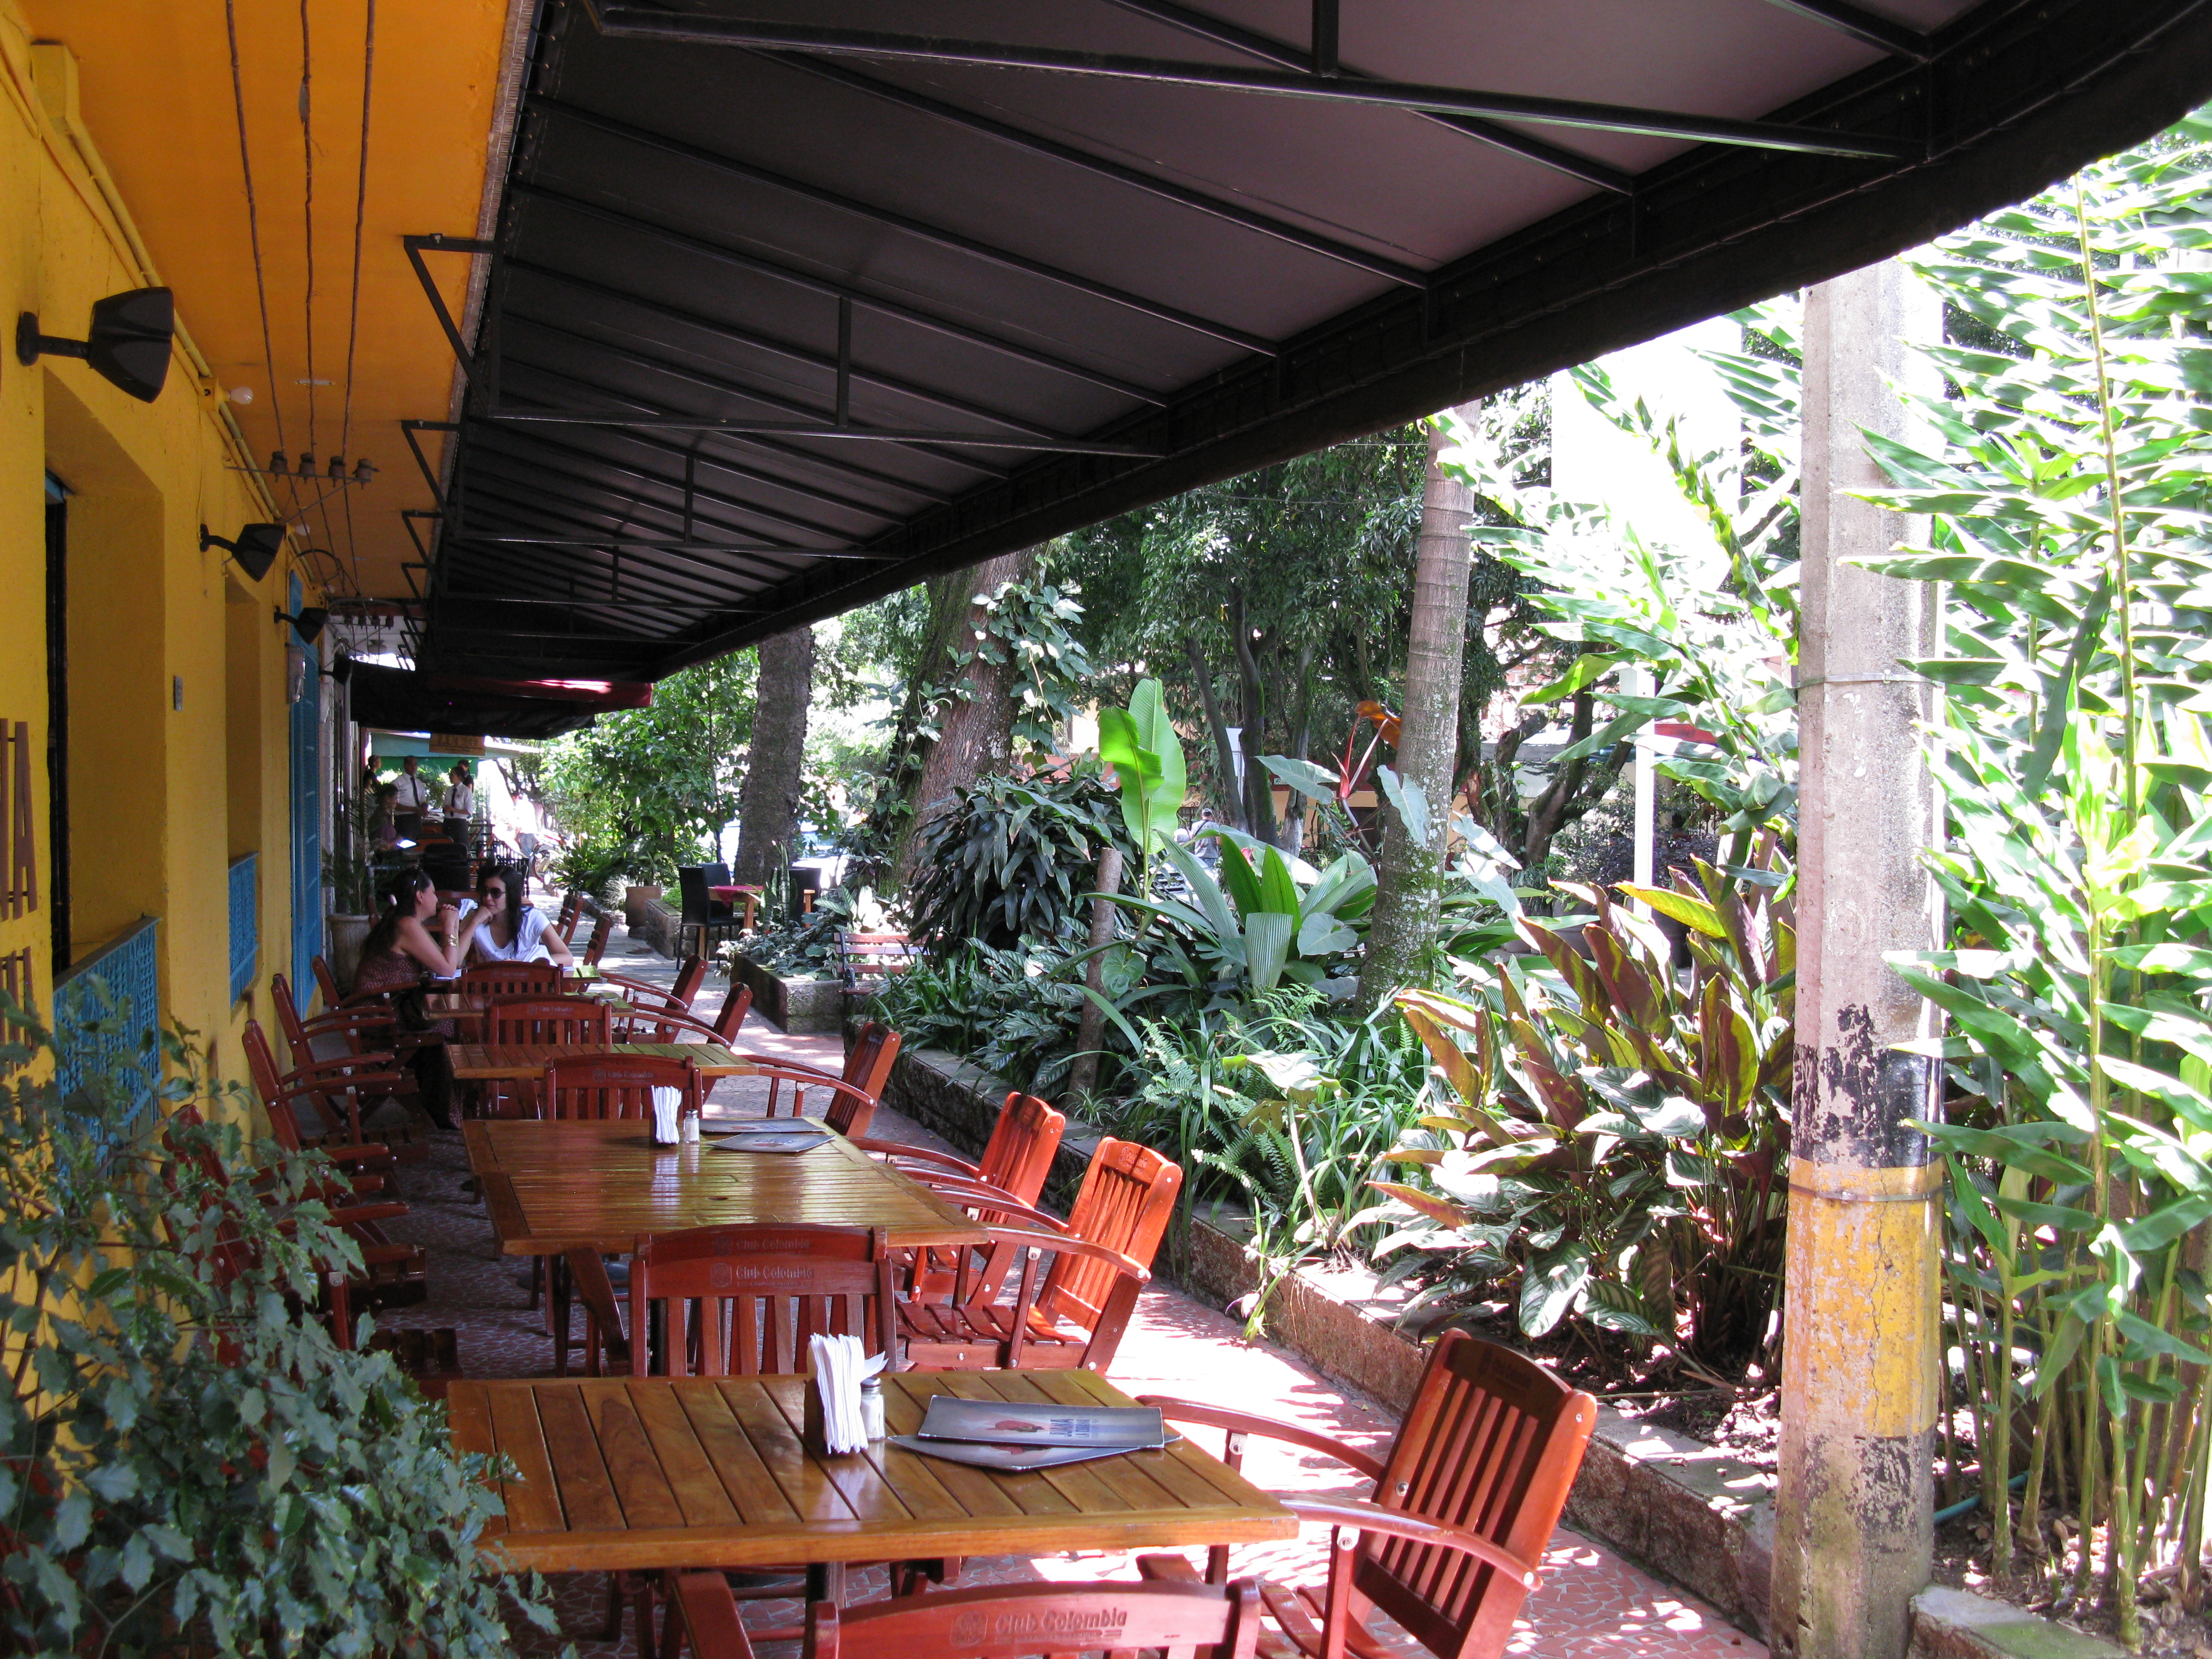 Quiet, tree-lined streets and sidewalk dining are drawing expats to Envigado